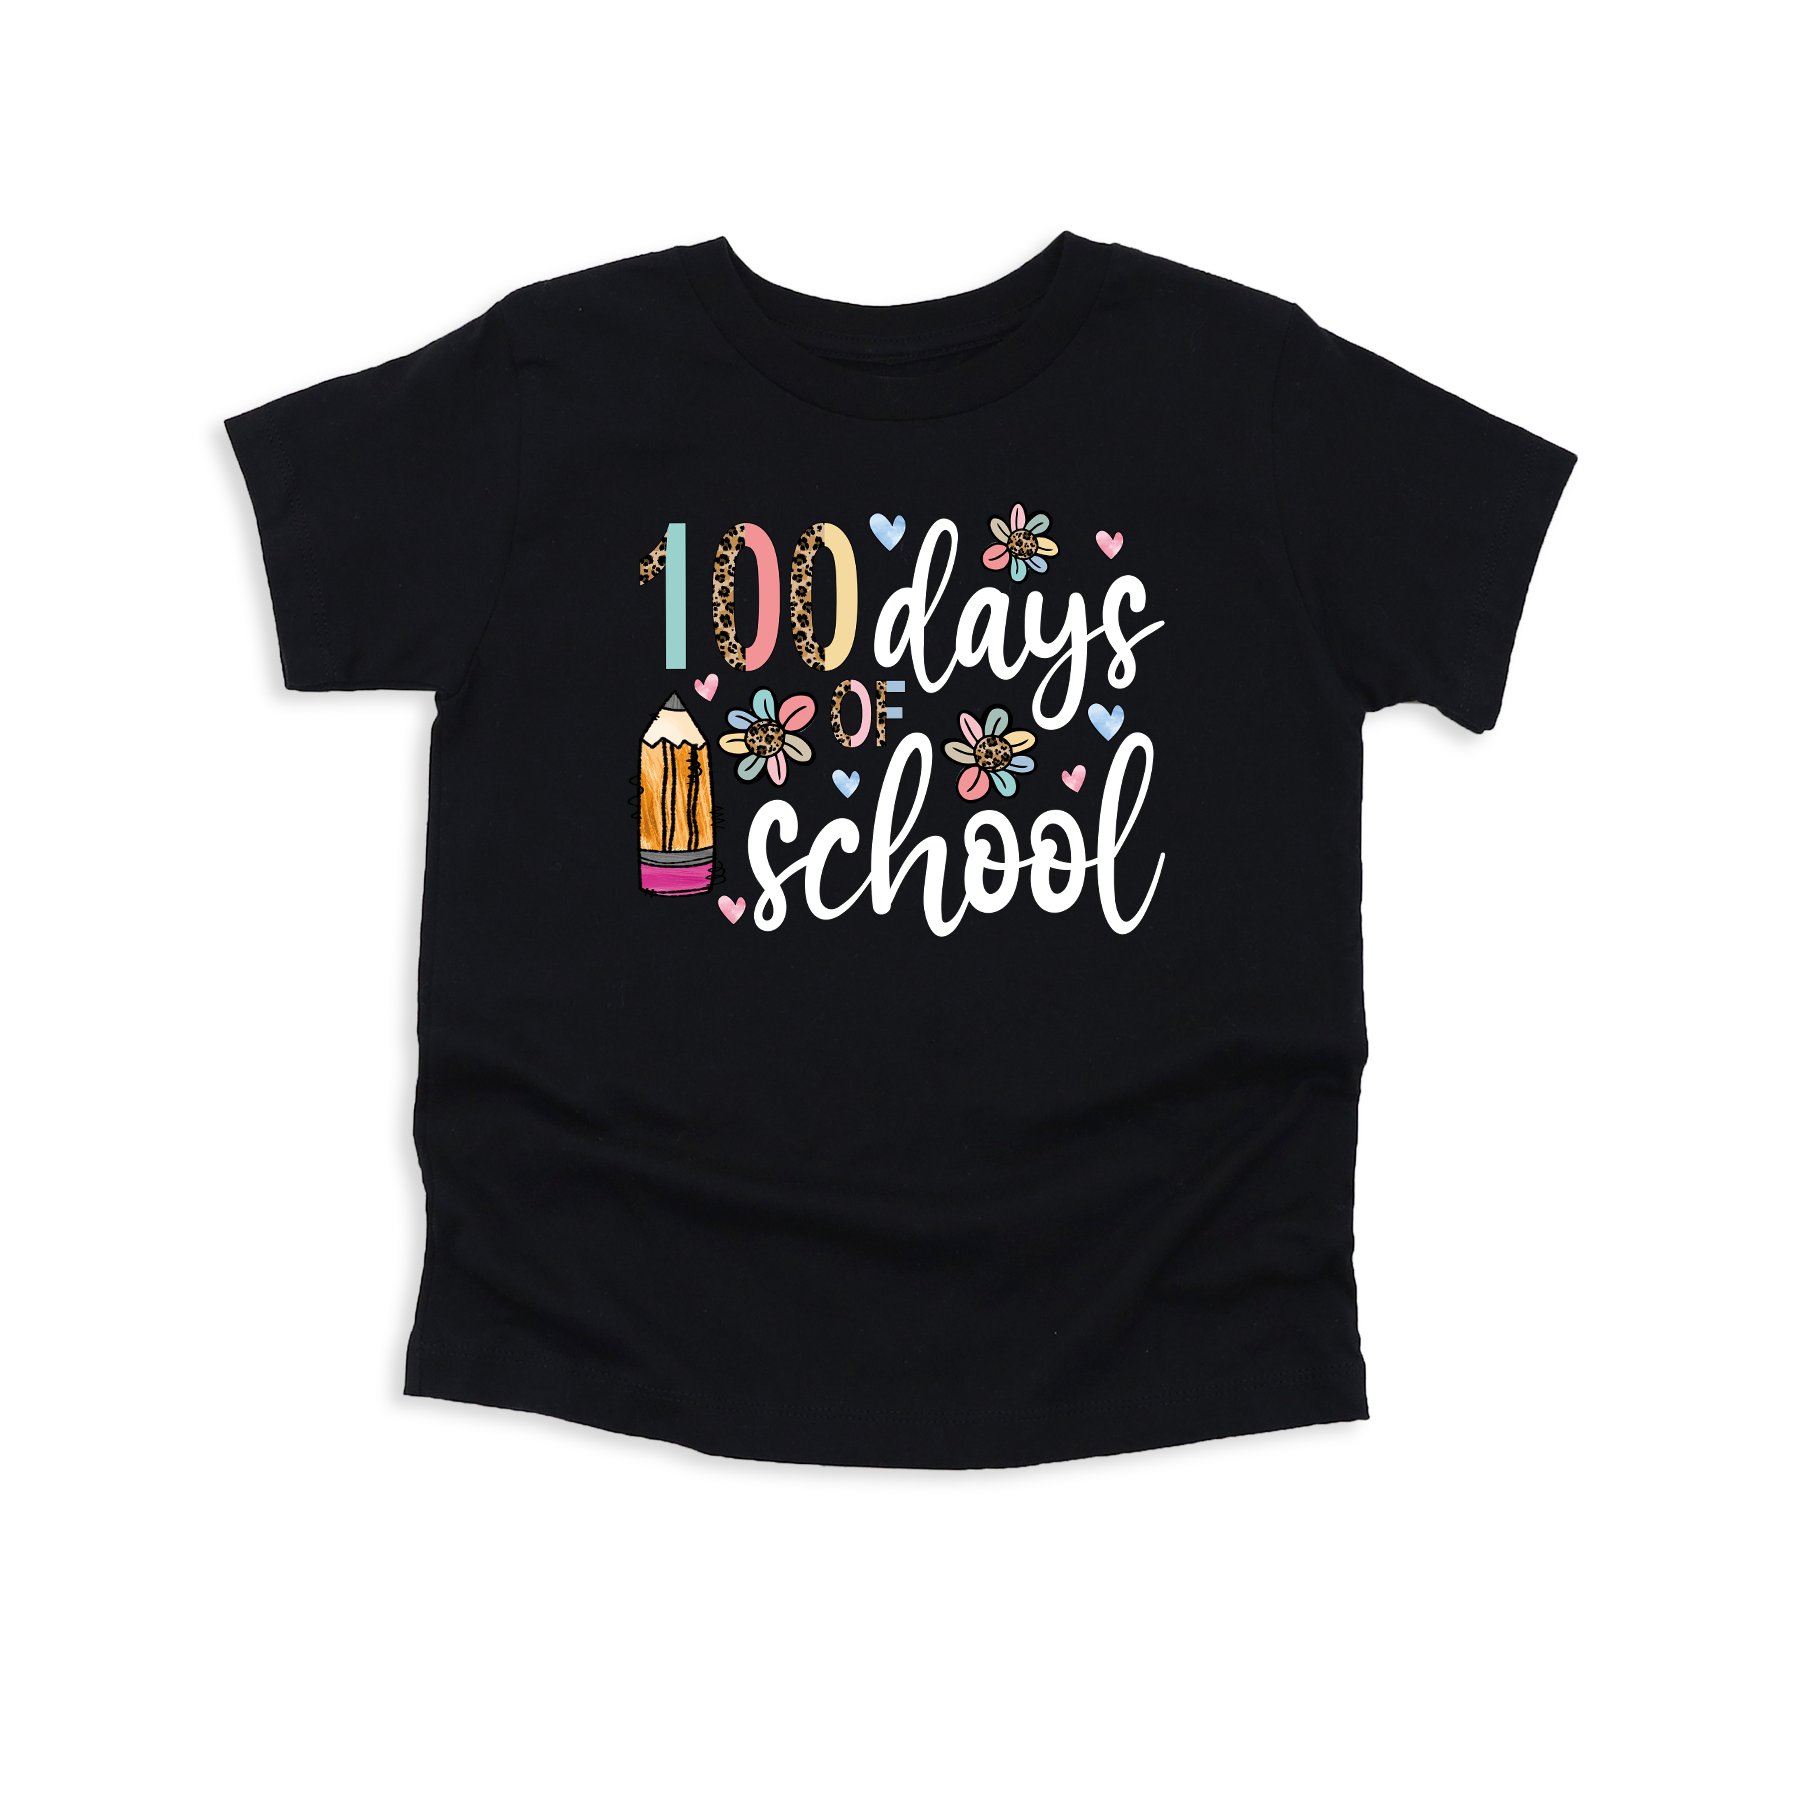 100 Days of School Shirt all size